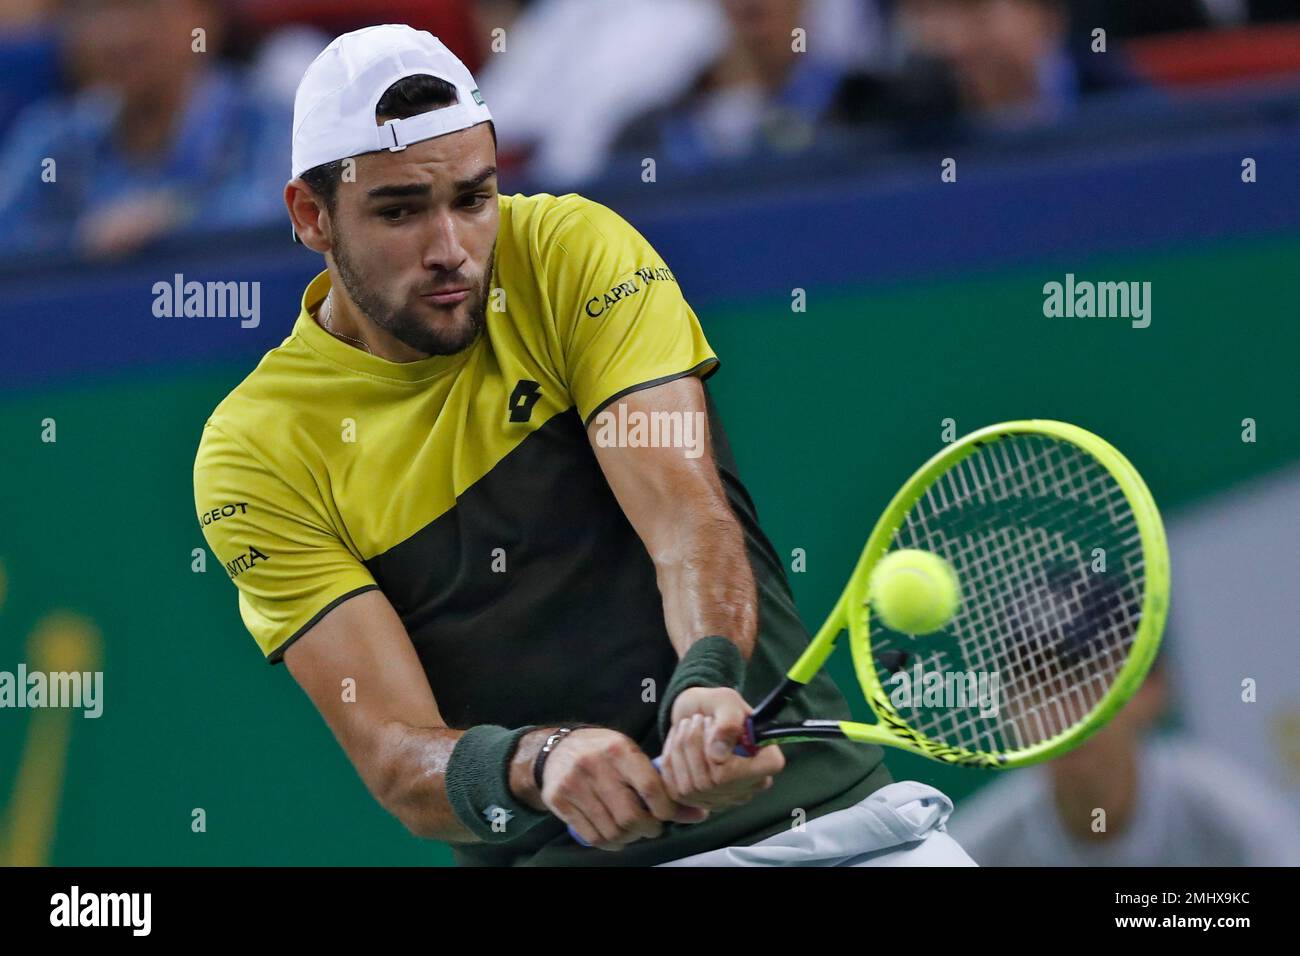 Matteo Berrettini of Italy hits a return shot against Alexander Zverev of  Germany in their men's singles semifinal match at the Shanghai Masters  tennis tournament at Qizhong Forest Sports City Tennis Center